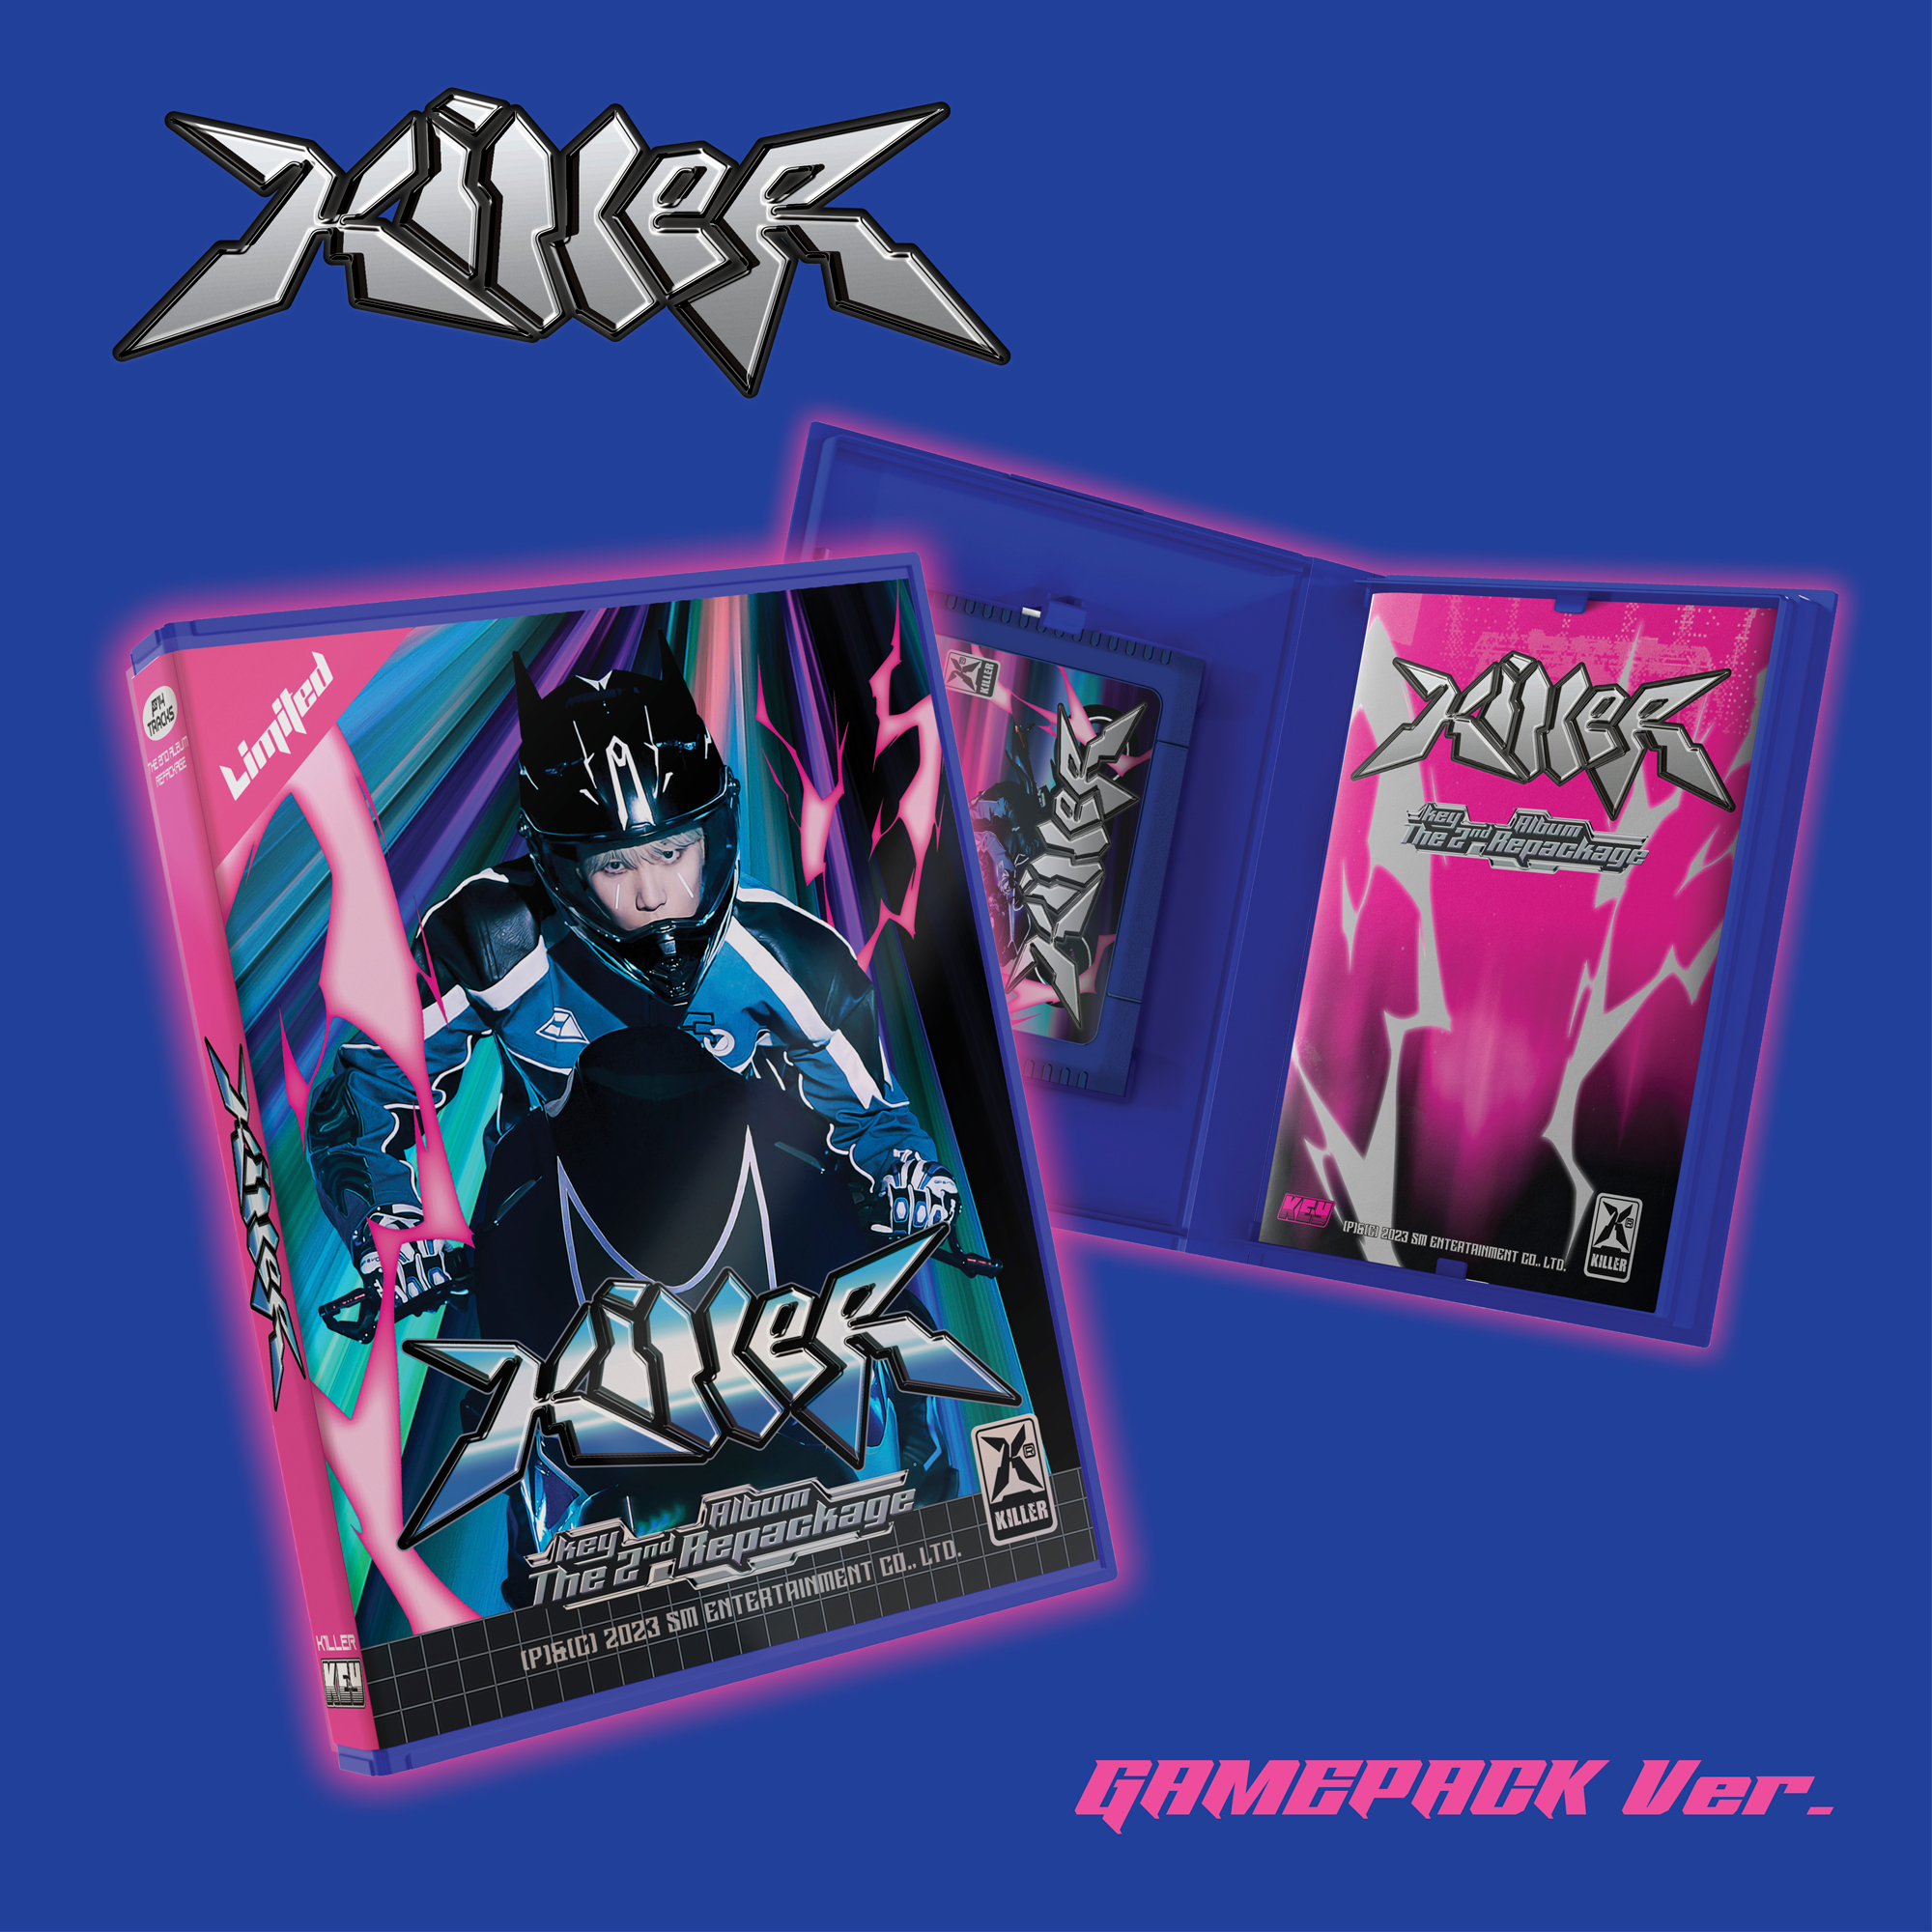 [@shawolacademyph] Key - The 2nd Album Repackage [Killer] (GAMEPACK Ver.) (First Press Limited Edition)